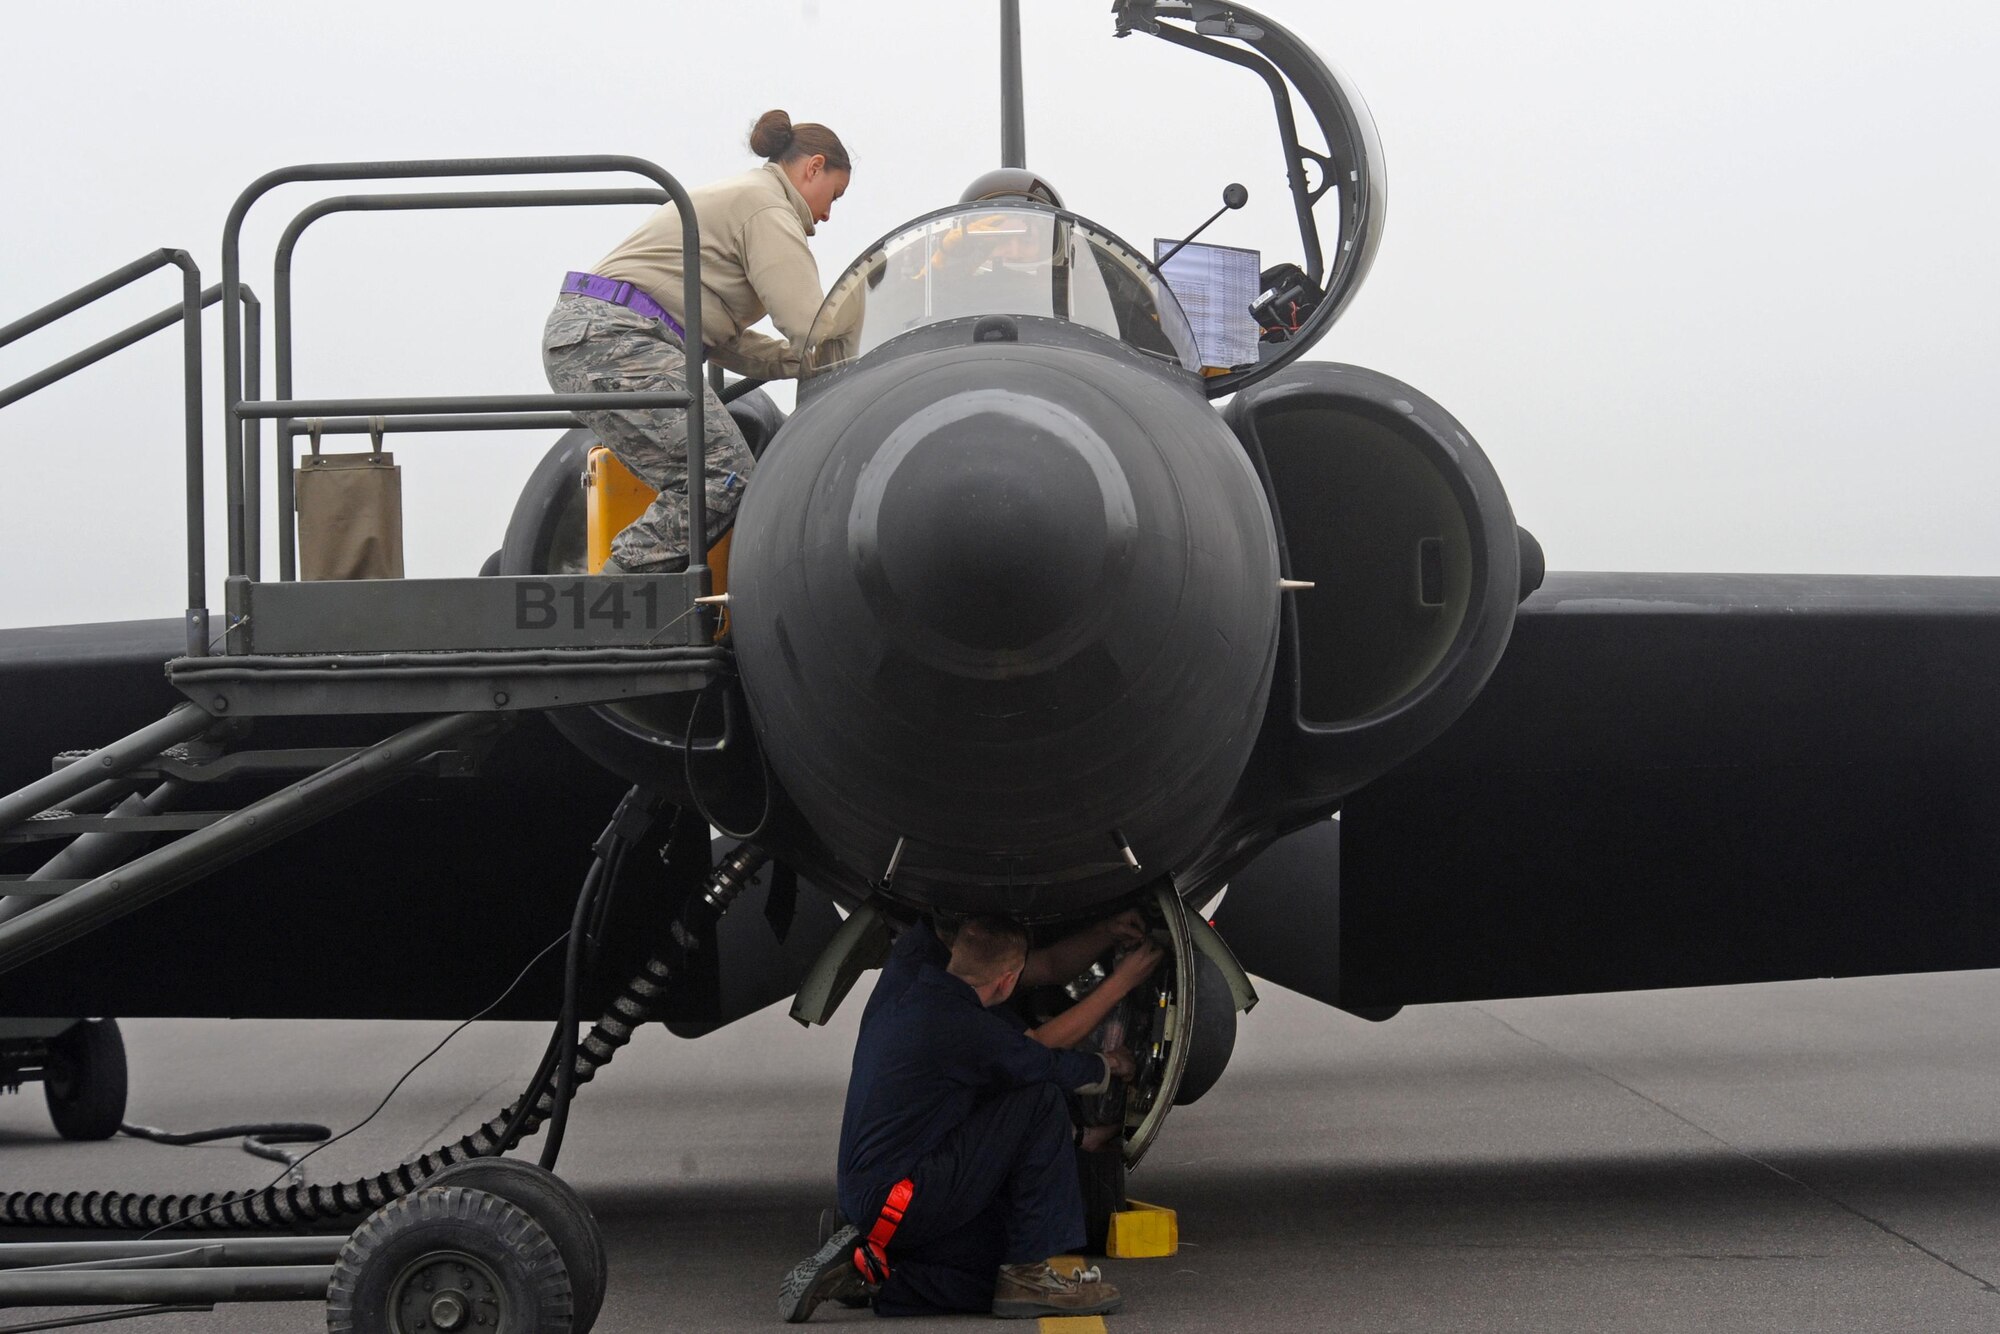 Staff Sgt. Julie Orellana (above), 9th Physiology Support Squadron launch and recovery technician, connects a pilot's life-support equipment to the aircraft, as Senior Airman Ryan Turnbull, 9th Aircraft Maintenance Squadron U-2 Dragon Lady dedicated crew chief, conducts a final pre-flight inspection June 9, 2016, at Royal Air Force Fairford, Gloucestershire, England. Orellana and Turnbull were members of Beale's en route recovery team (ERT), at RAF Fairford, which transitions aircraft from and to Beale Air Force Base, California, and forward operating locations (FOL). The ERT is used like a pit crew at the midway point in Fairford, ensuring the aircraft are prepared to make it to their next destination. (U.S. Air Force photo by Senior Airman Ramon A. Adelan)